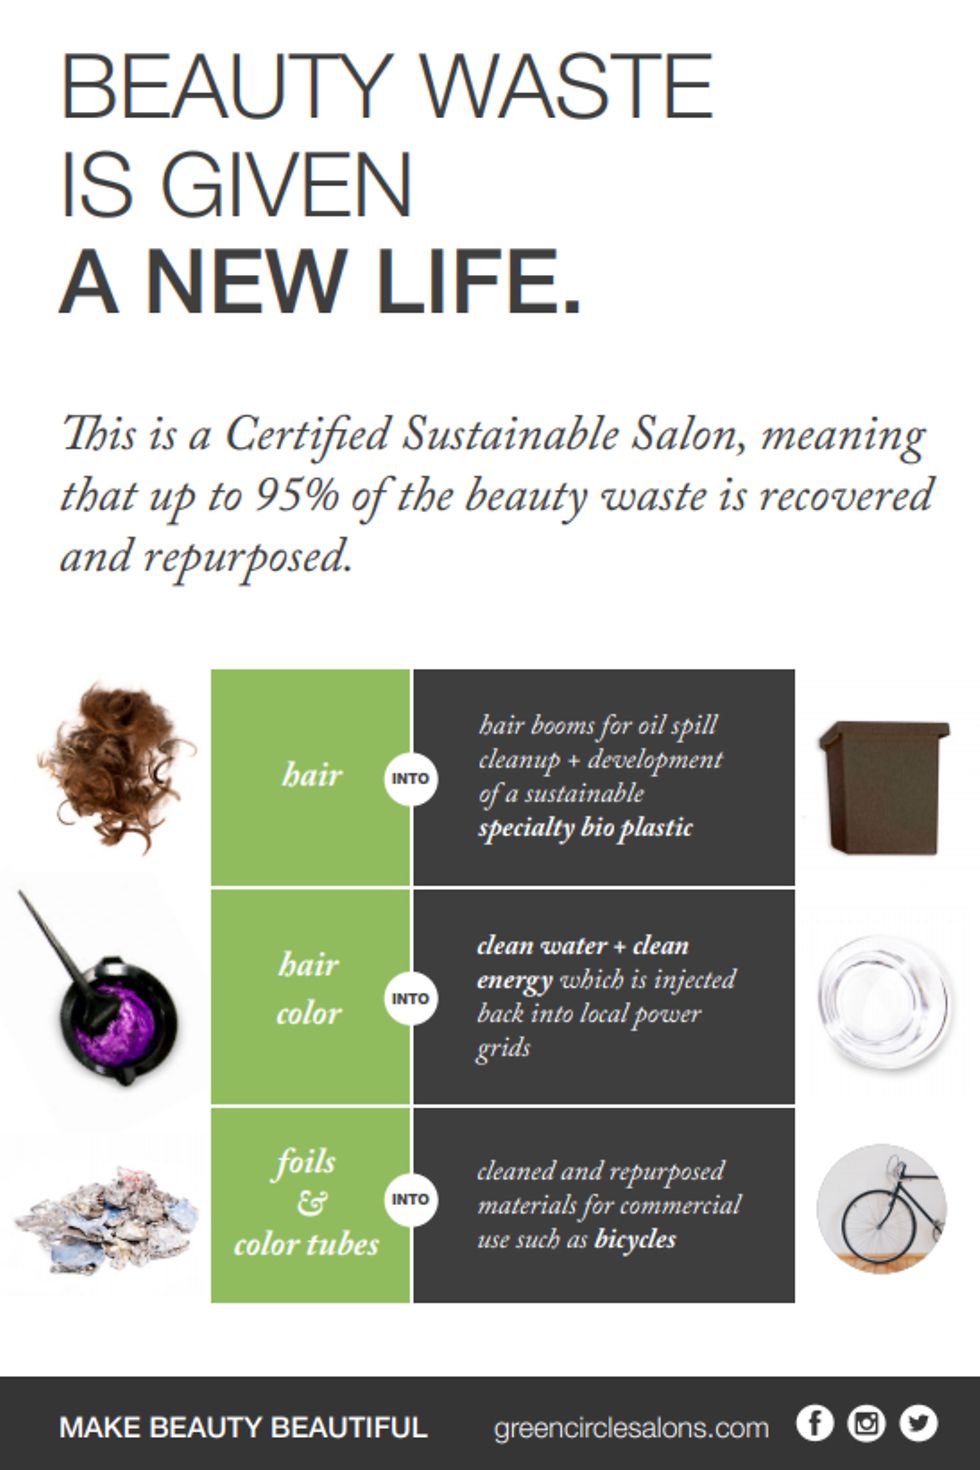 Henkel has Green Circle Salons programs in place at its R&D centers in Culver City, California, Stamford and Darien, Connecticut, as well as the Test Salon and the #AcademyofHair in Culver City